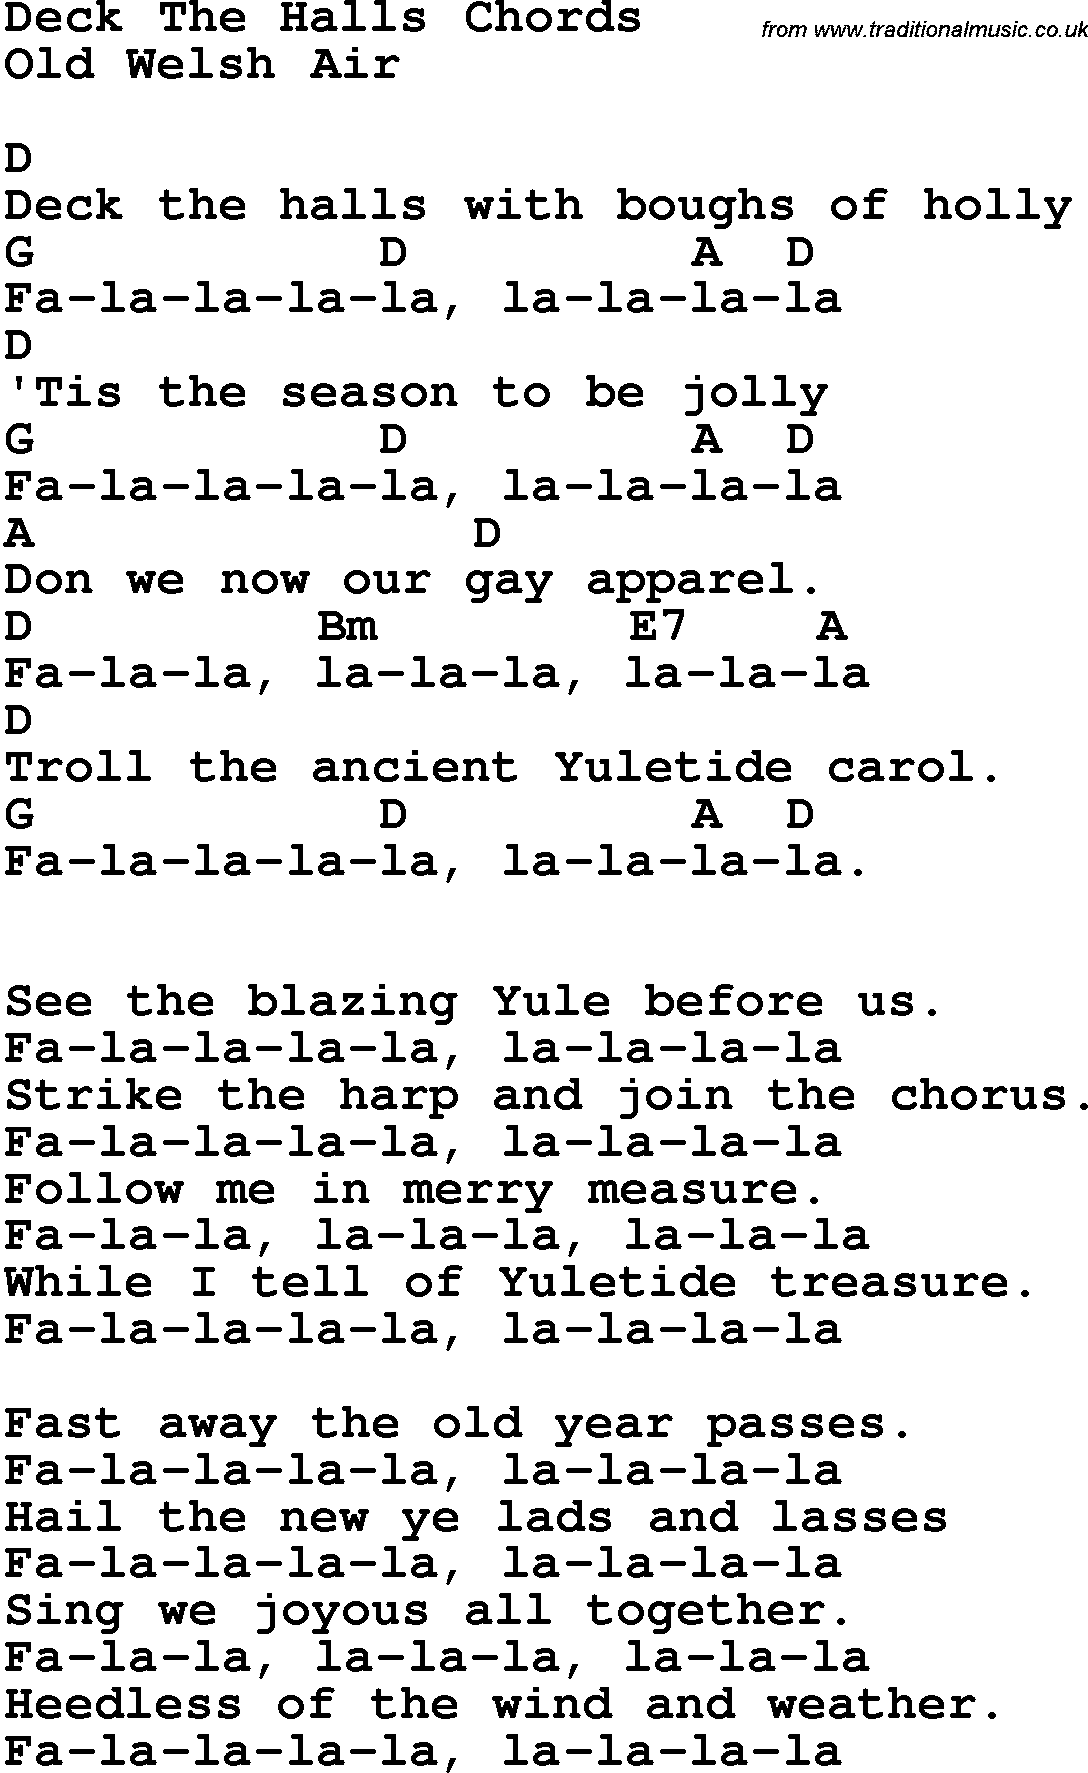 Song Lyrics with guitar chords for Deck The Halls